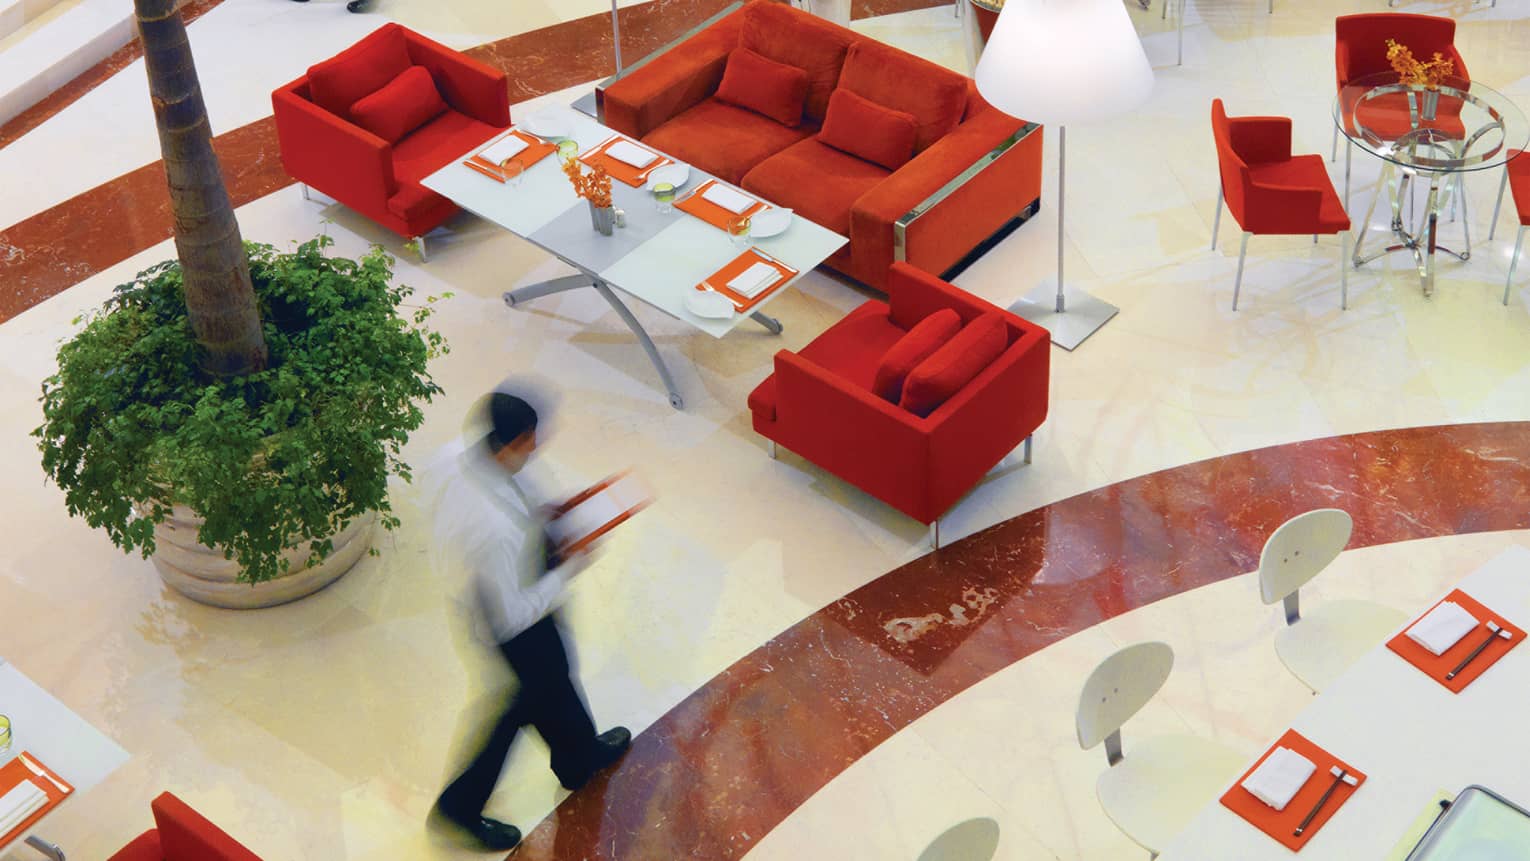 Aerial view of server walking quickly through Beymen Cafe, past red sofas and chairs and indoor tree